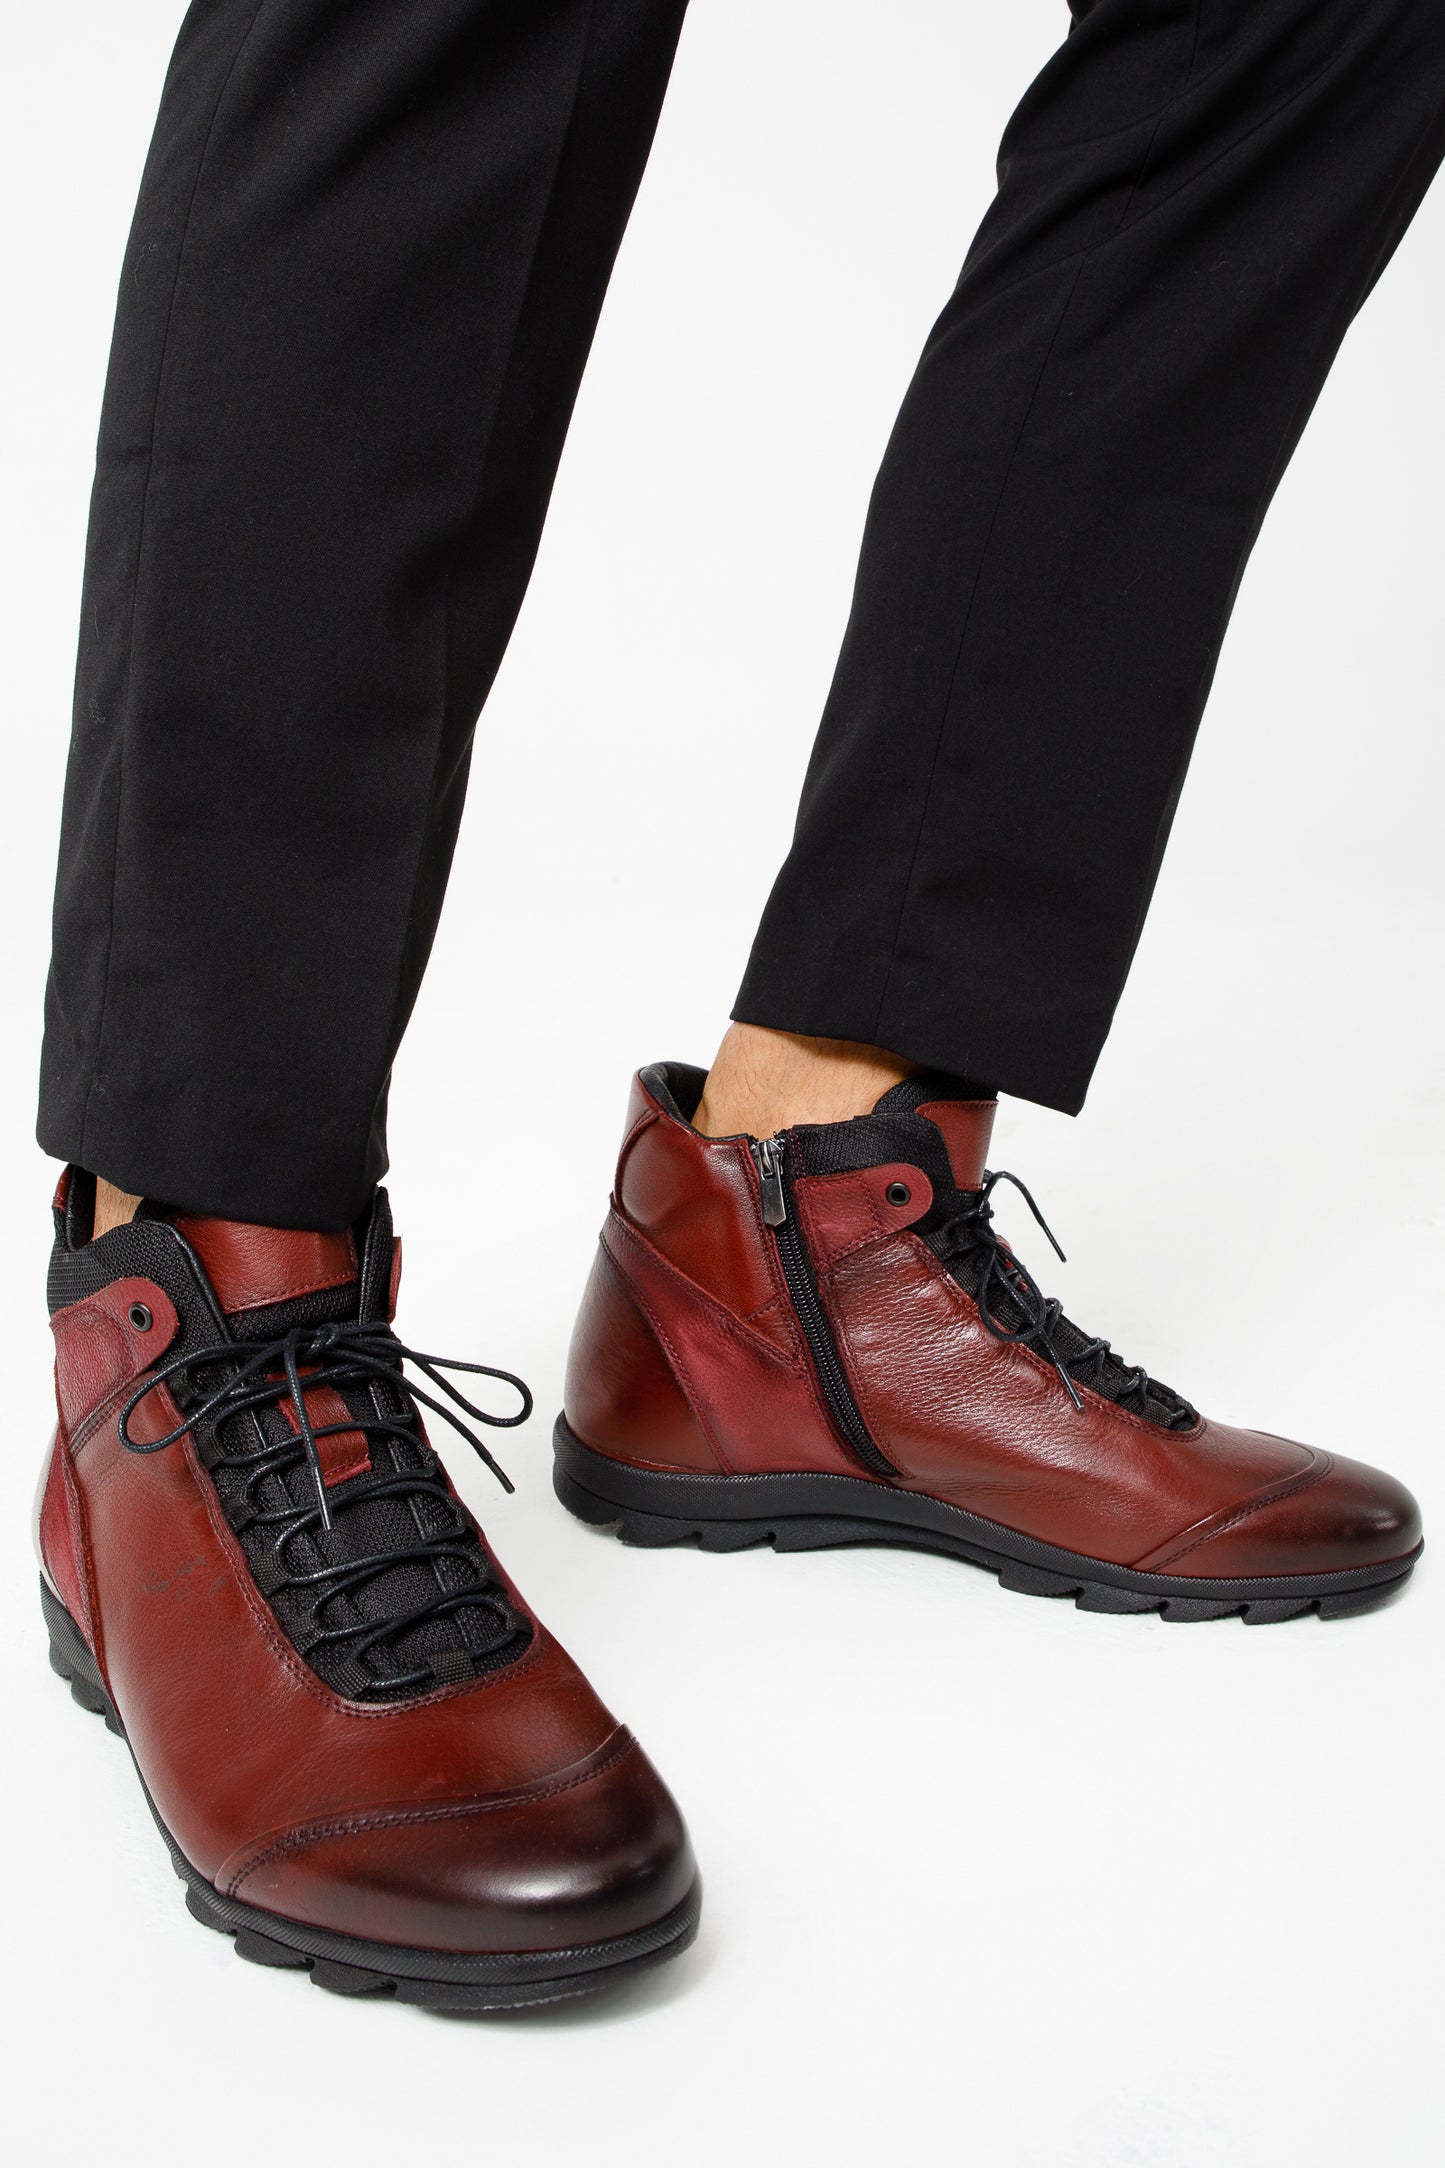 The Houston Leather Burgundy Lace-Up Casual Men Boot with a Zipper